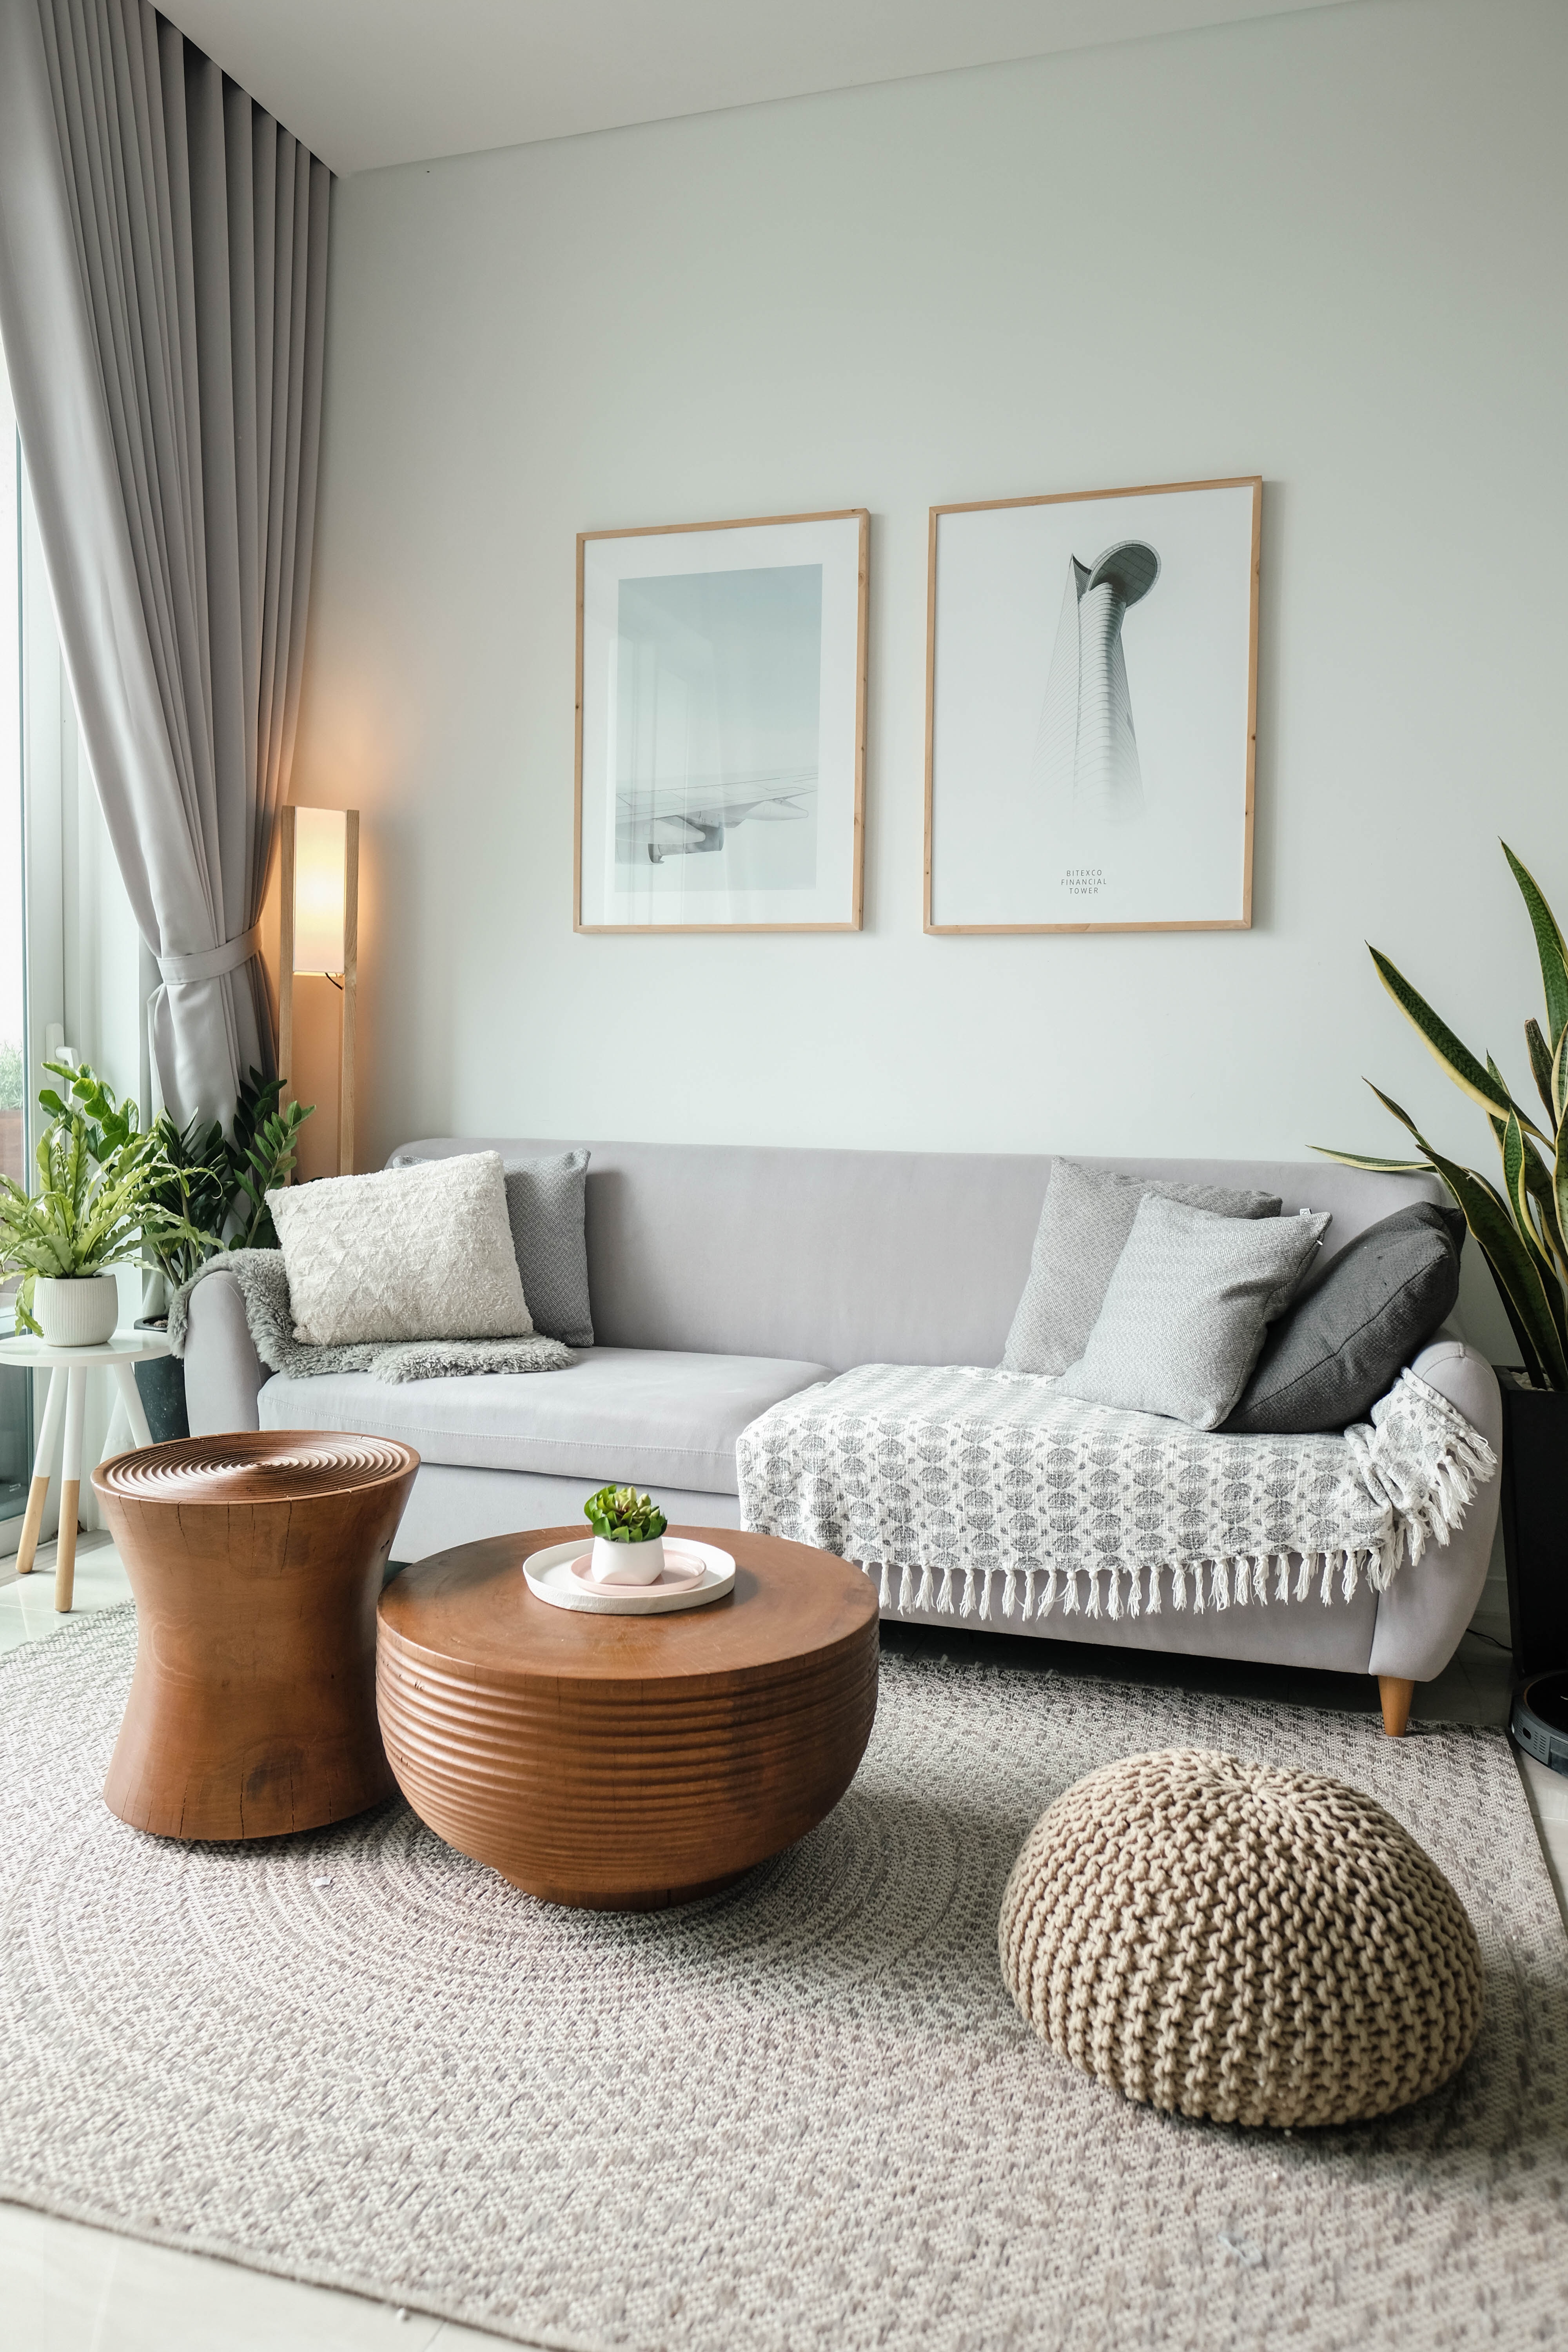 Light grey sofa in a living room with natural elements and textured details